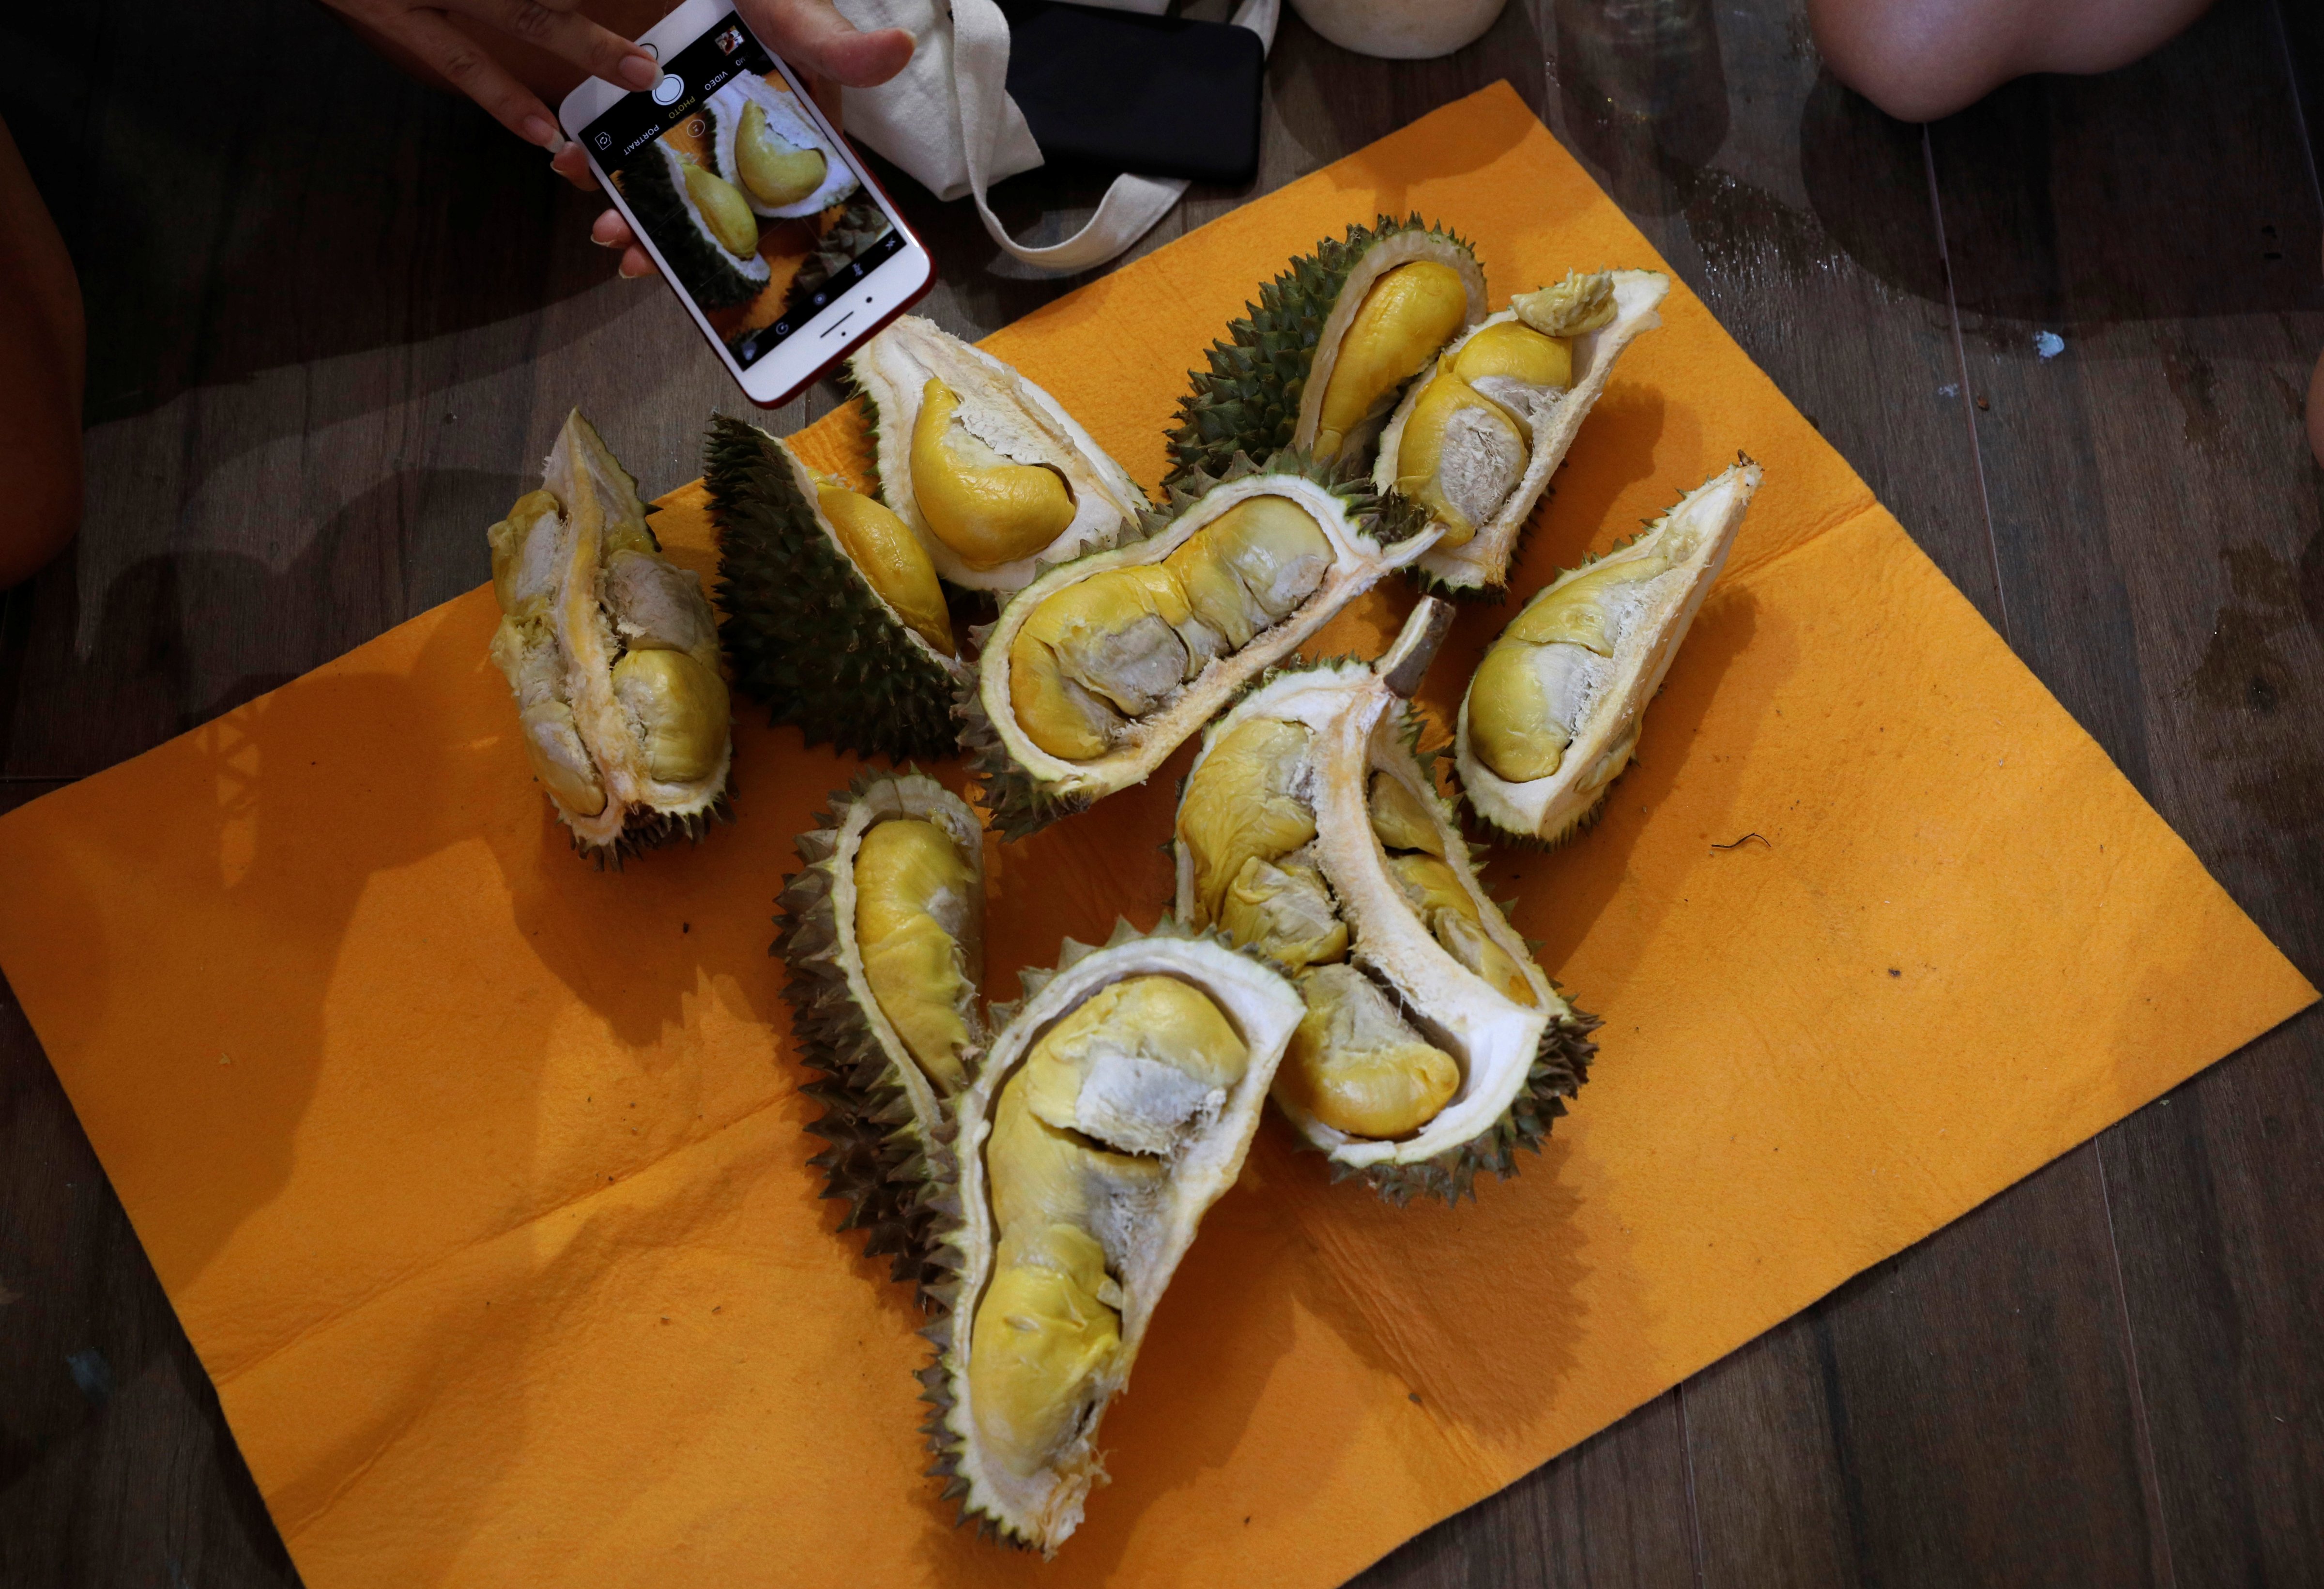 Participants take photos of their durians after the Durian Run in Singapore